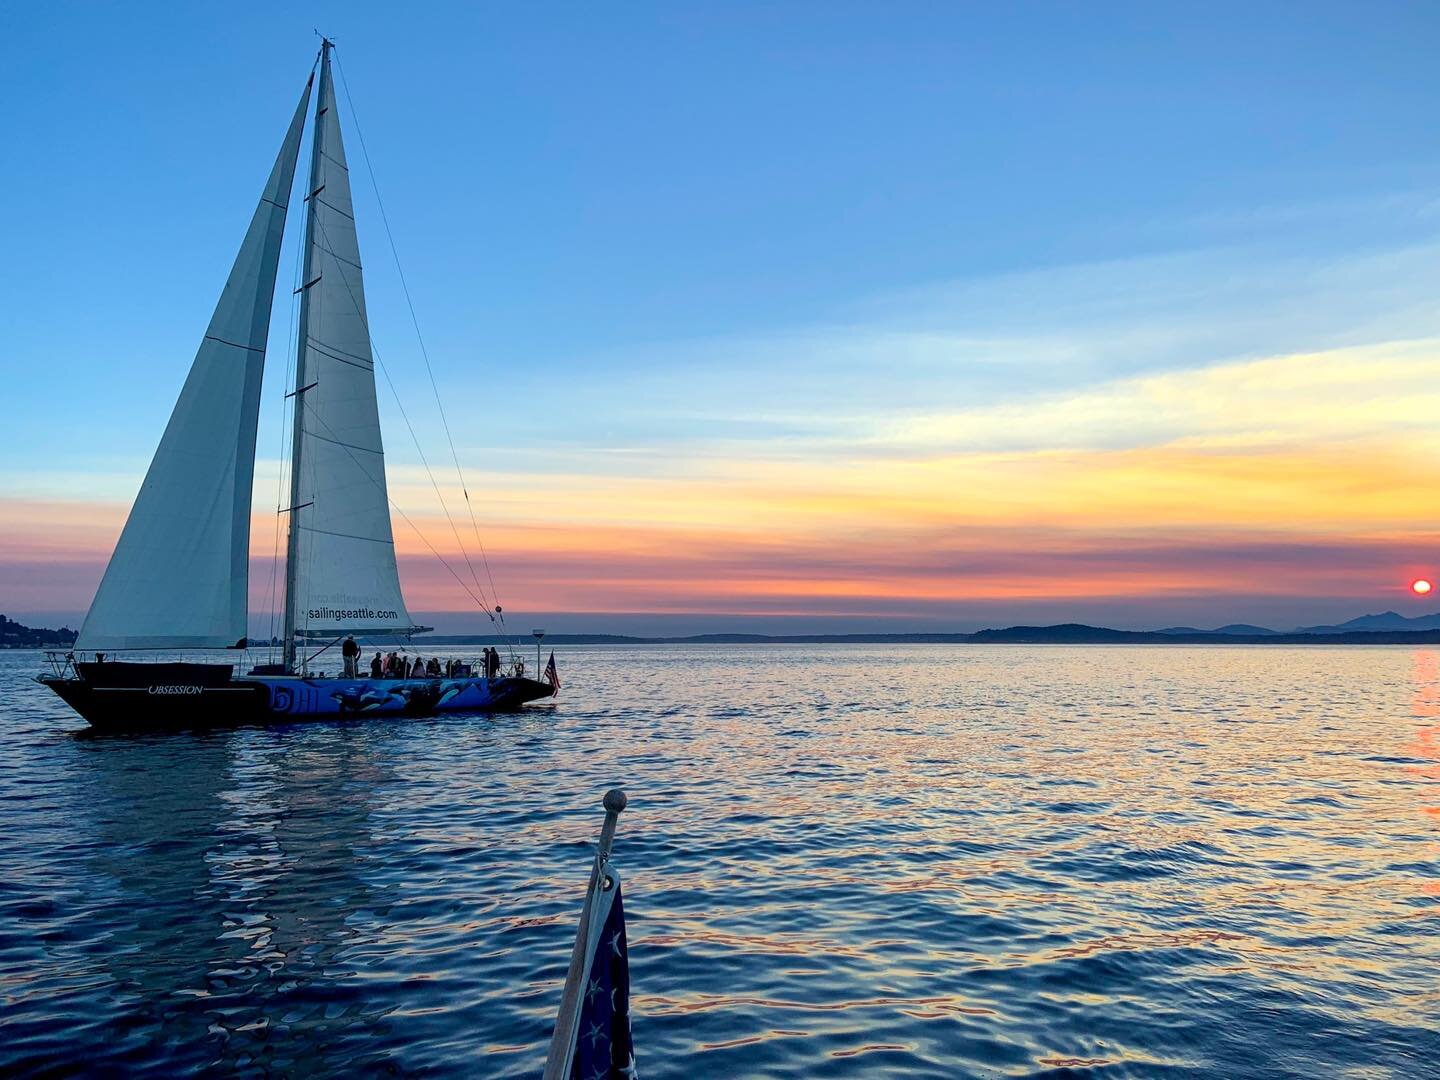 Happy 2024! Here&rsquo;s to hoping your New Year&rsquo;s resolution includes wanting to spend more time on the water! We will be back sailing this spring for our official 40th anniversary season. To start the year on a bright note, we are offering 20